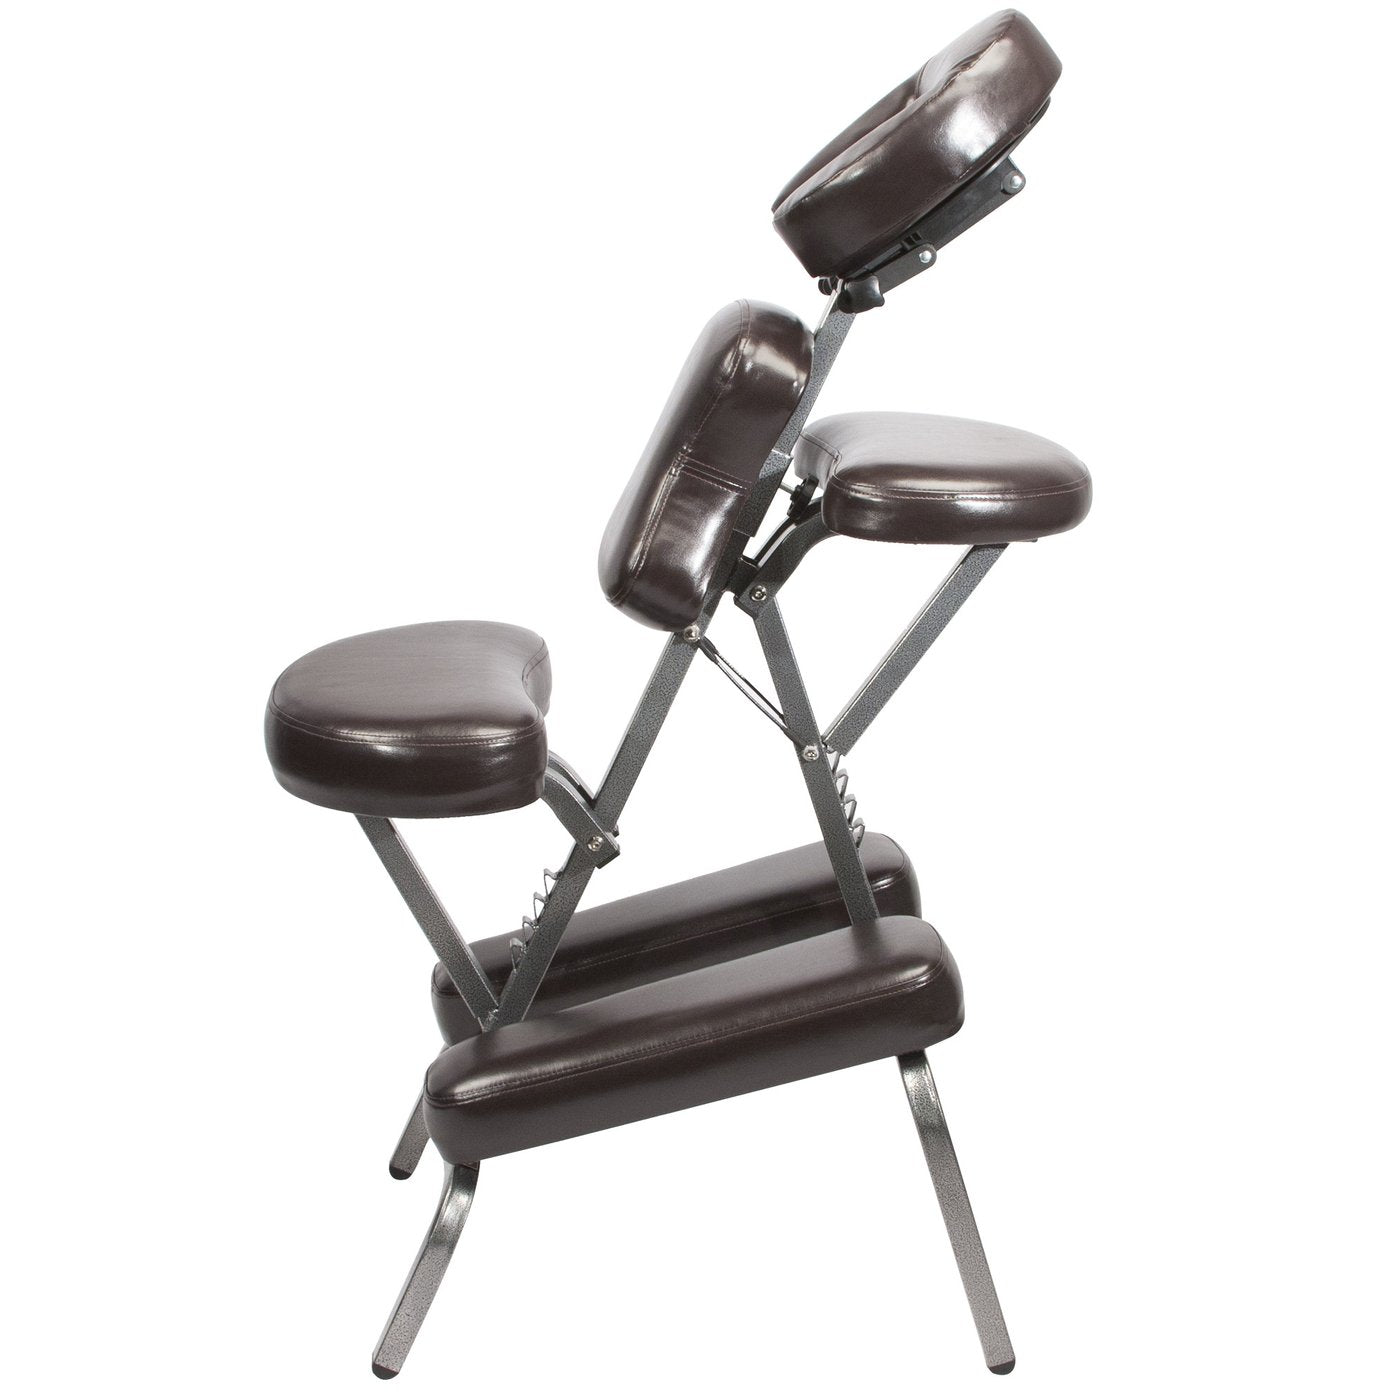 The BEDFORD™ Portable Massage Chair Package - Starter Chair, Coffee Luster